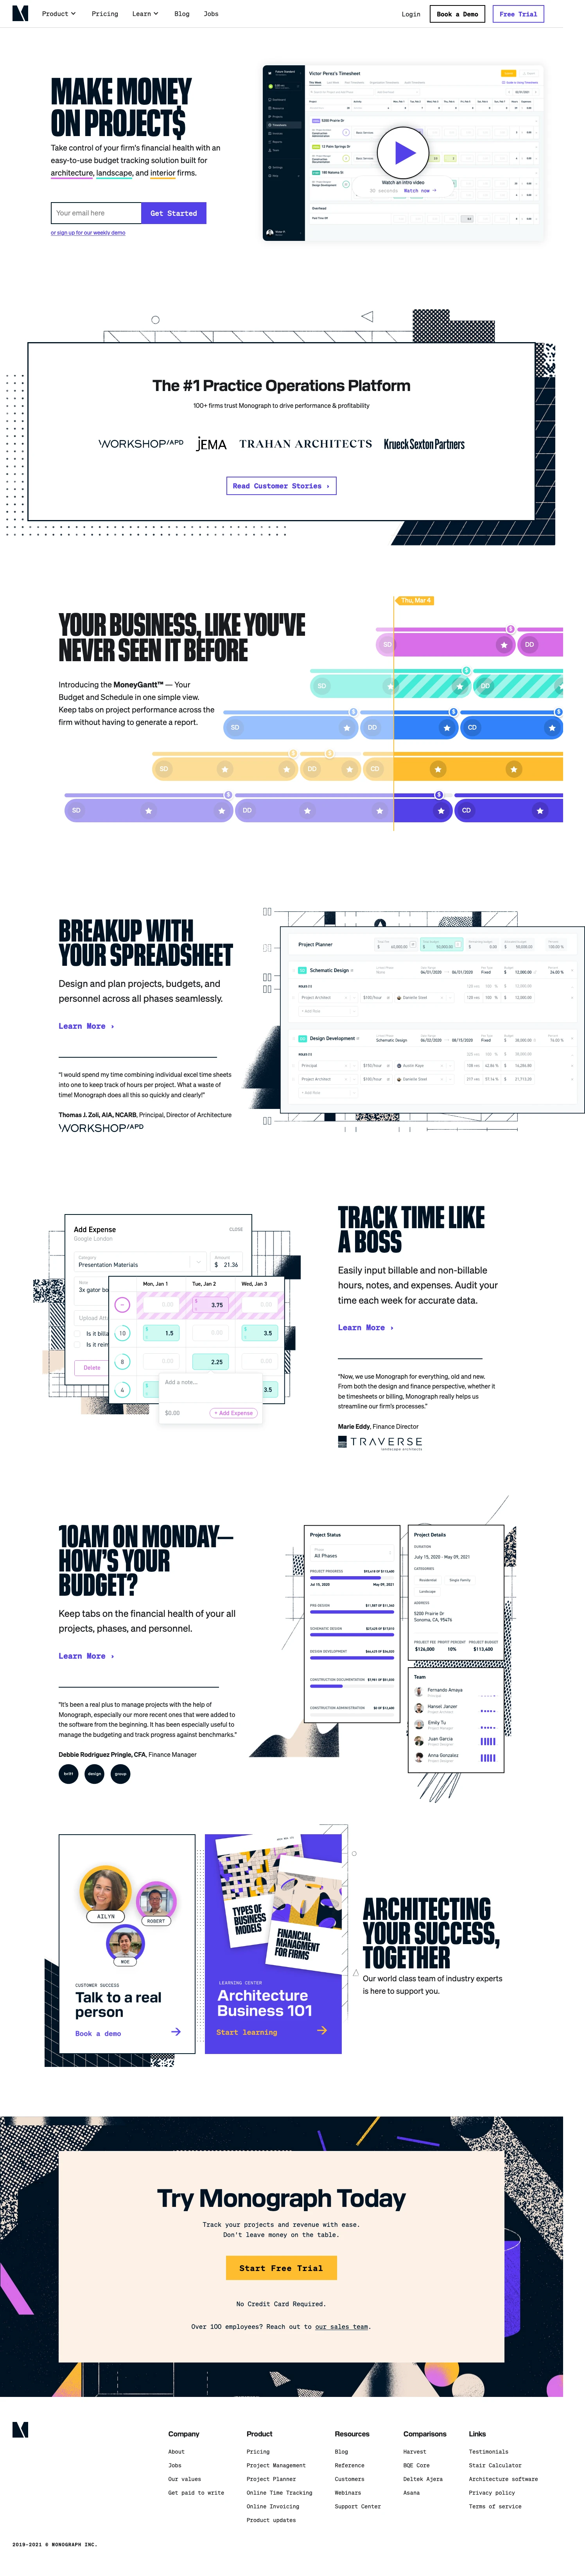 Monograph Landing Page Example: Take control of your firm's financial health with an easy-to-use budget tracking solution built for architecture, landscape, and interior firms.